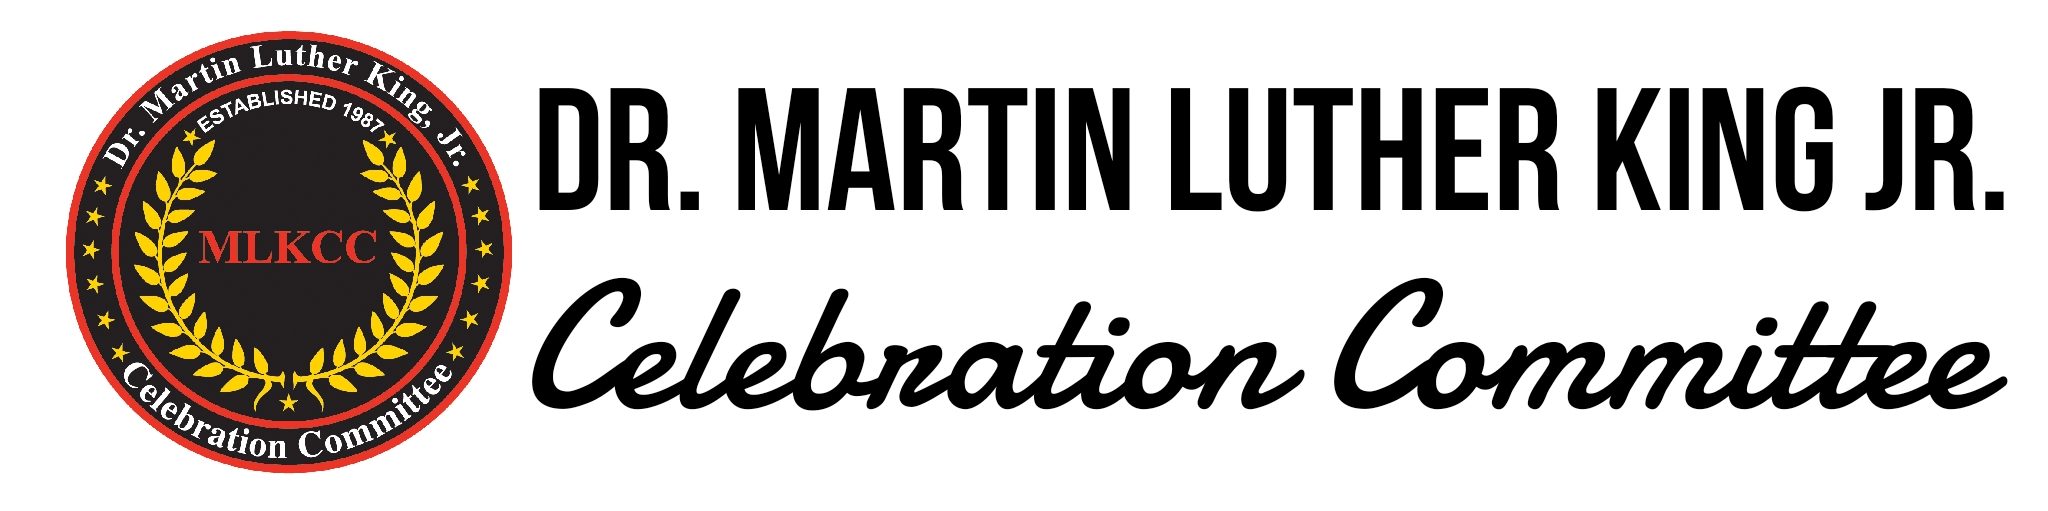 Dr. Martin Luther King Jr. Celebration Committee